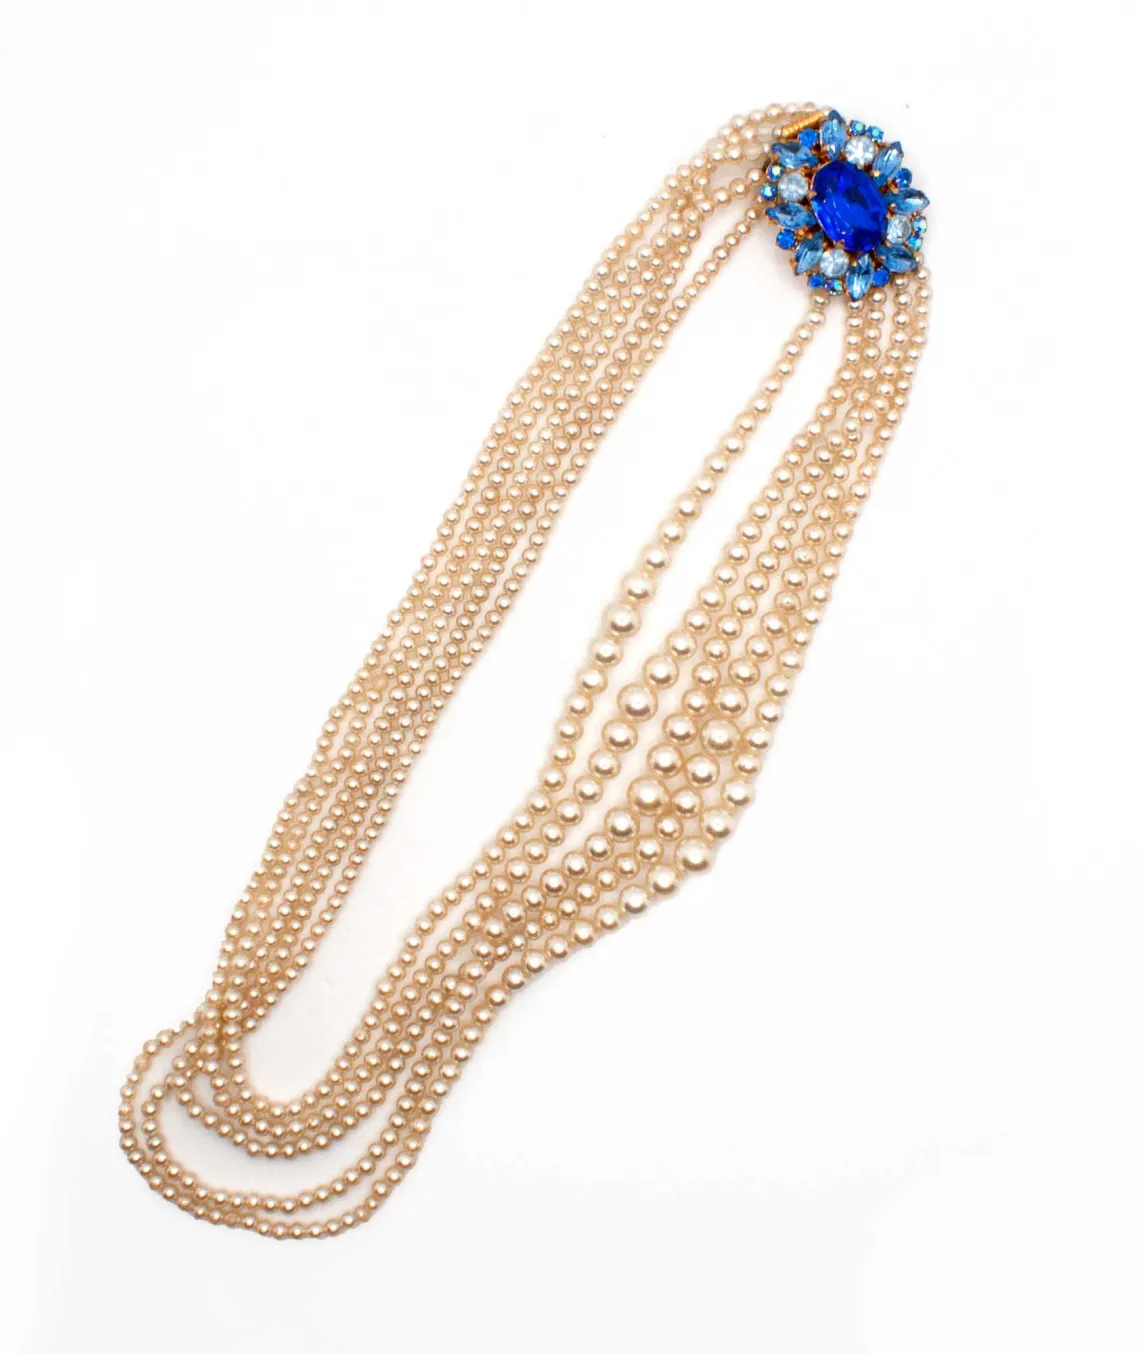 Vintage five-strand Faux Pearl Necklace with Decorative Blue crystal Clasp